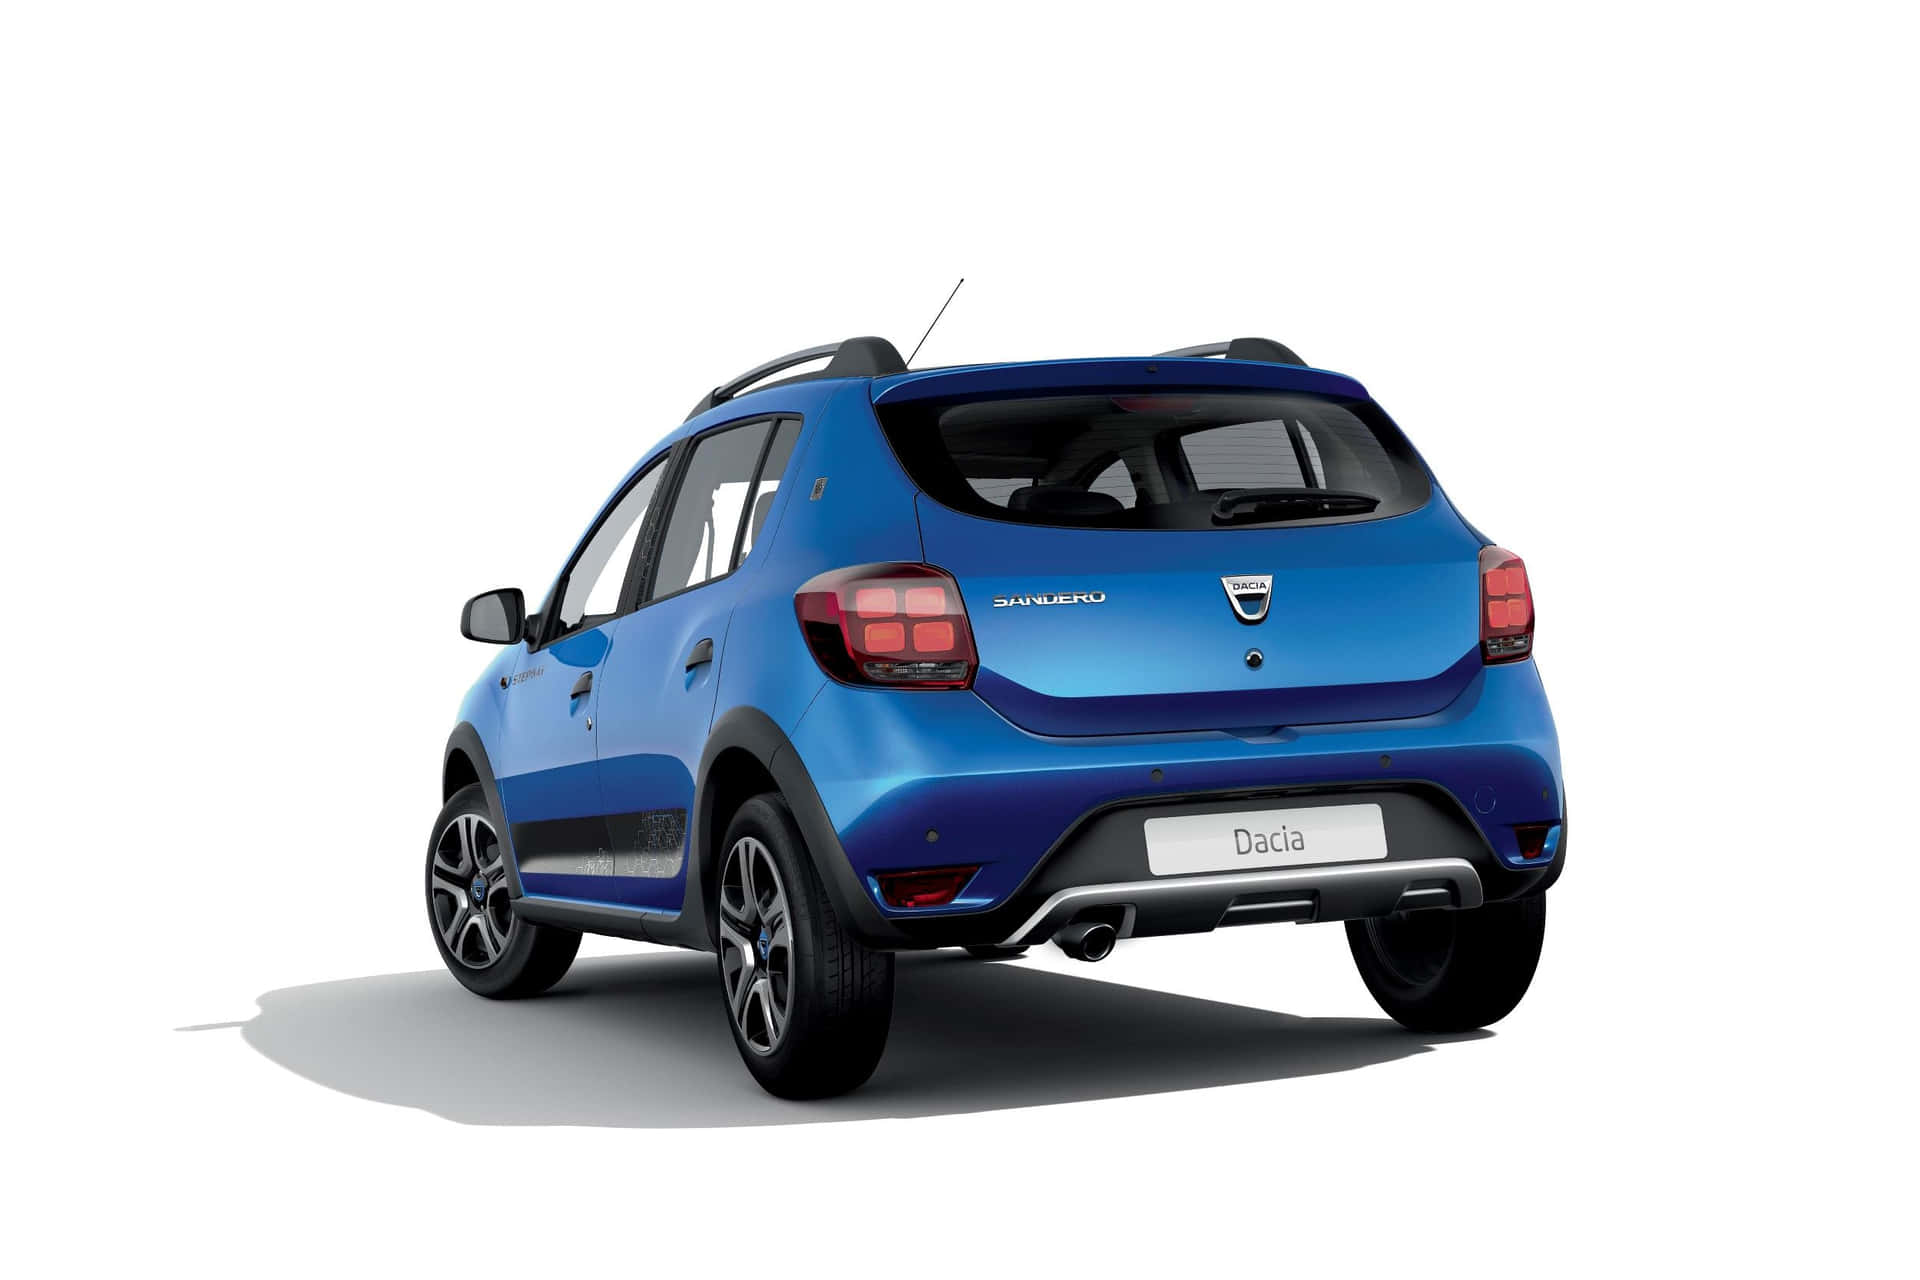 Dacia Car - A perfect blend of power and affordability Wallpaper